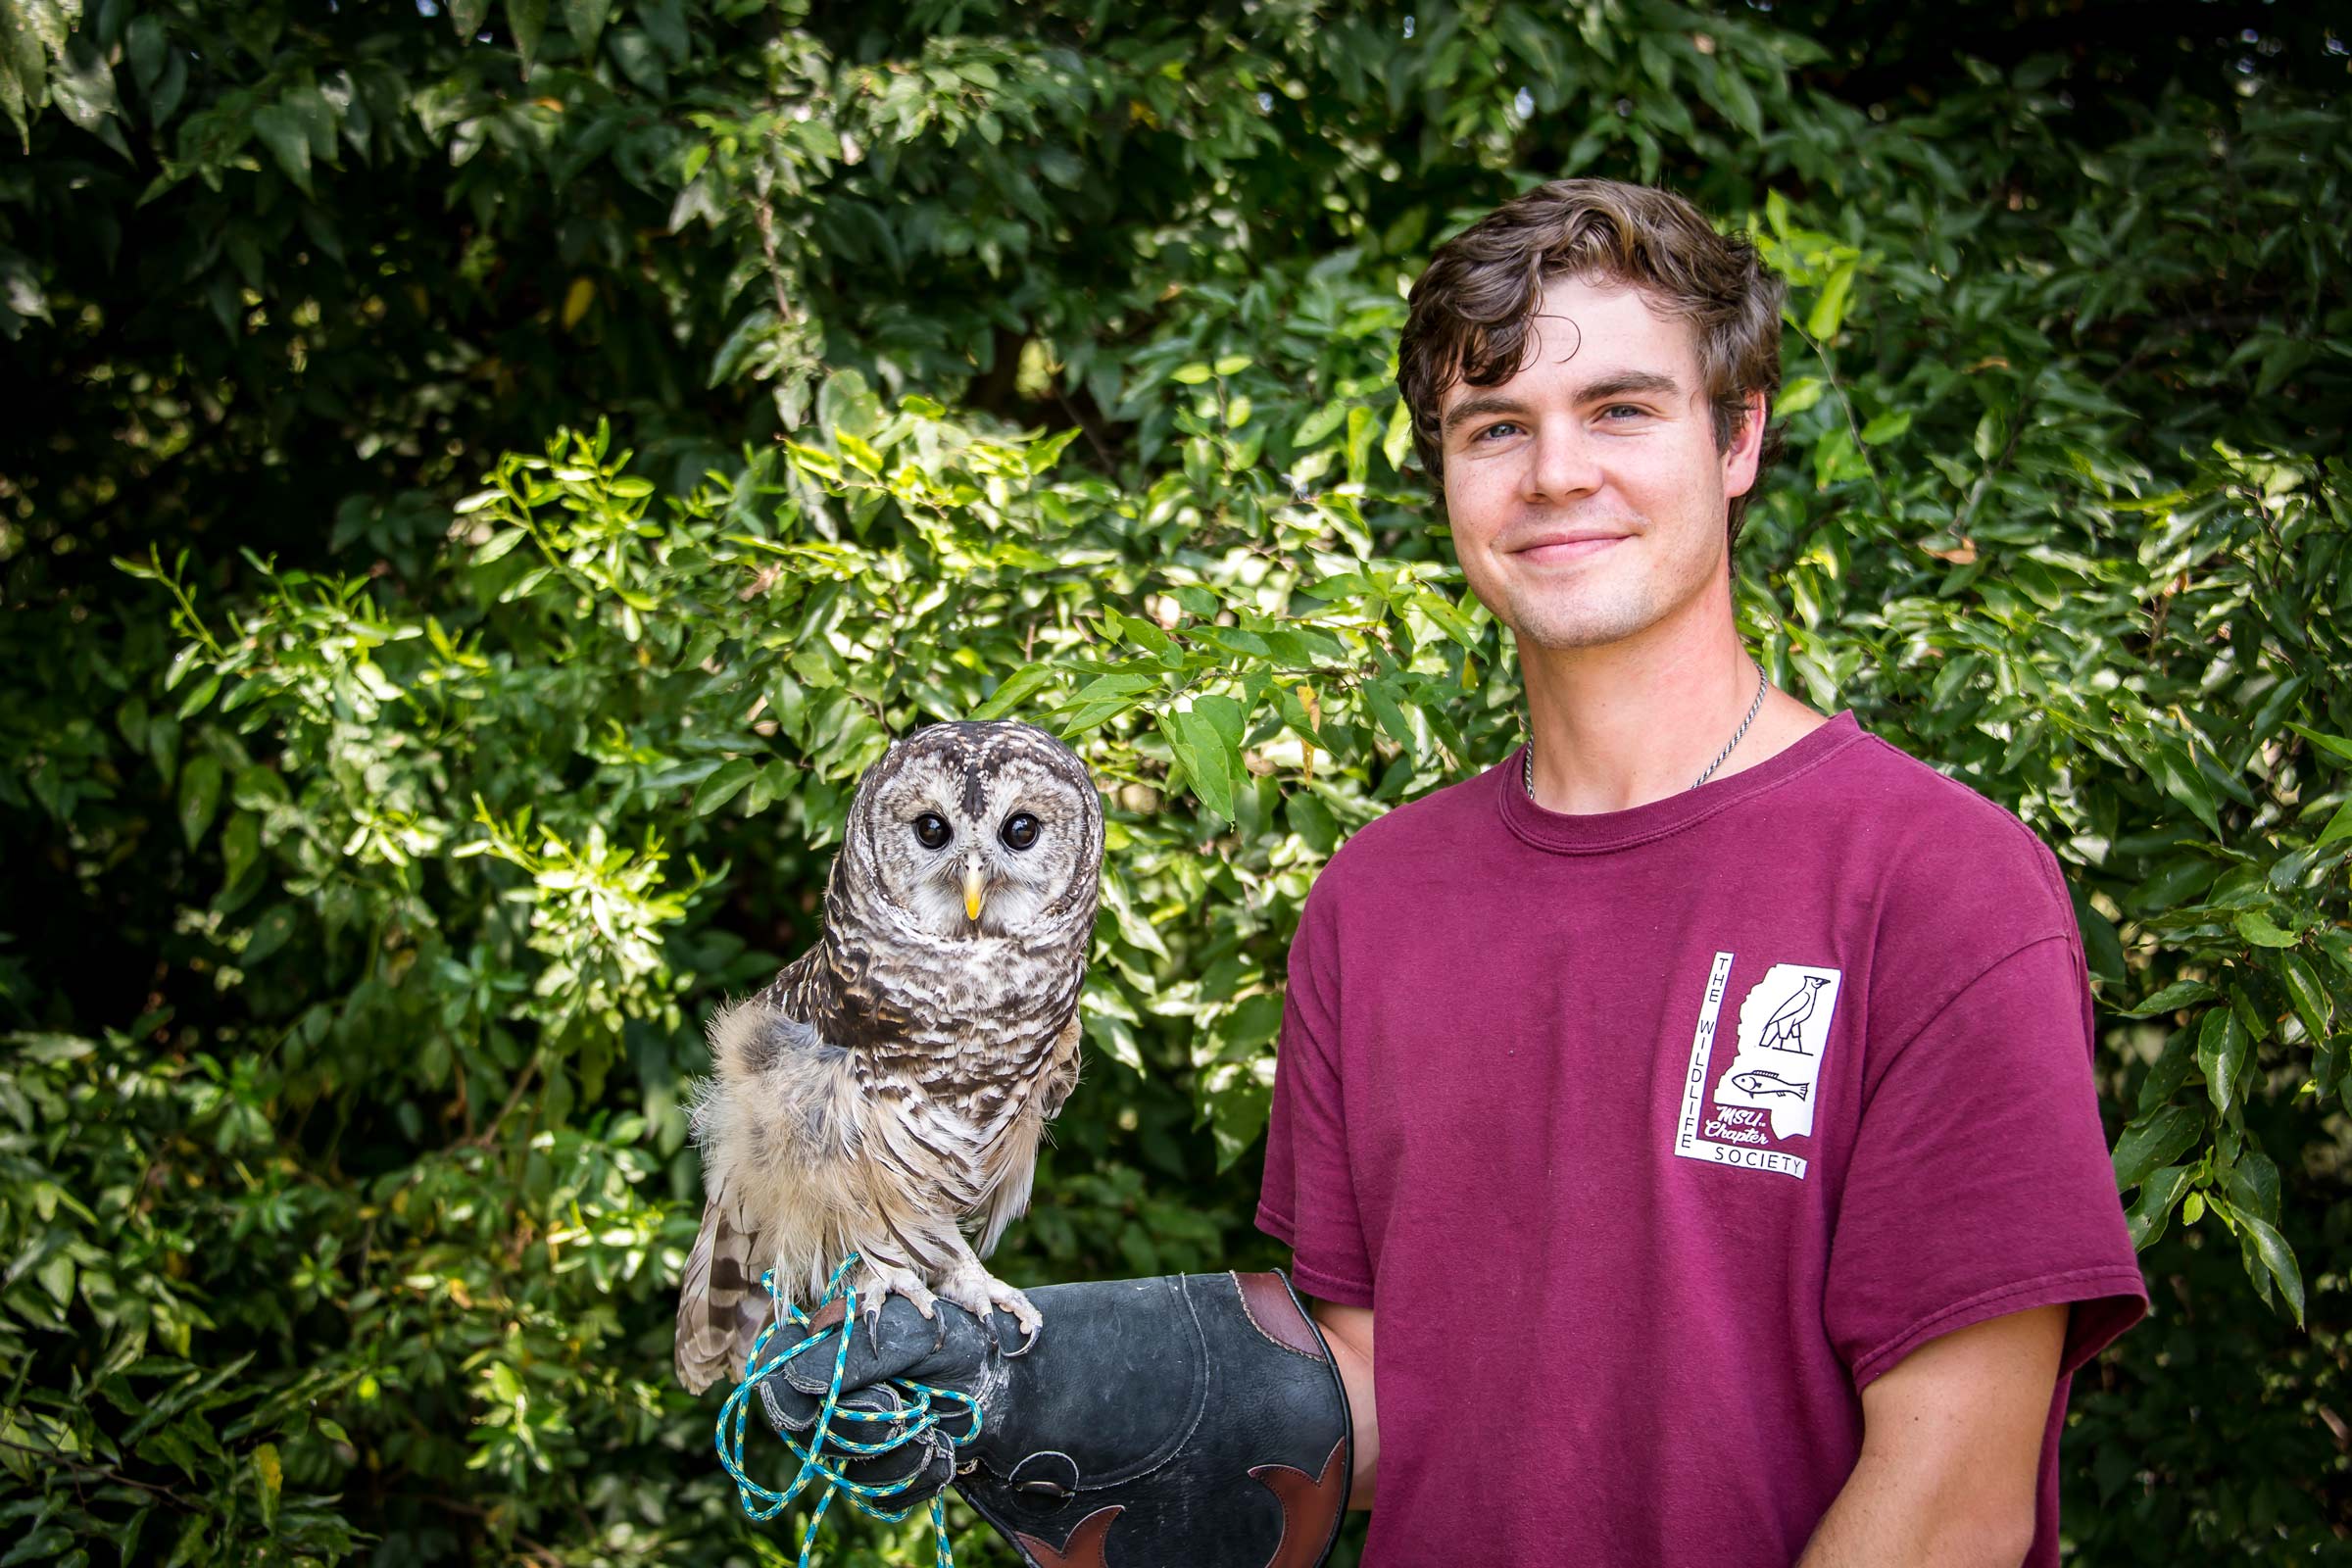 Carson Kitaif, pictured holding an owl.